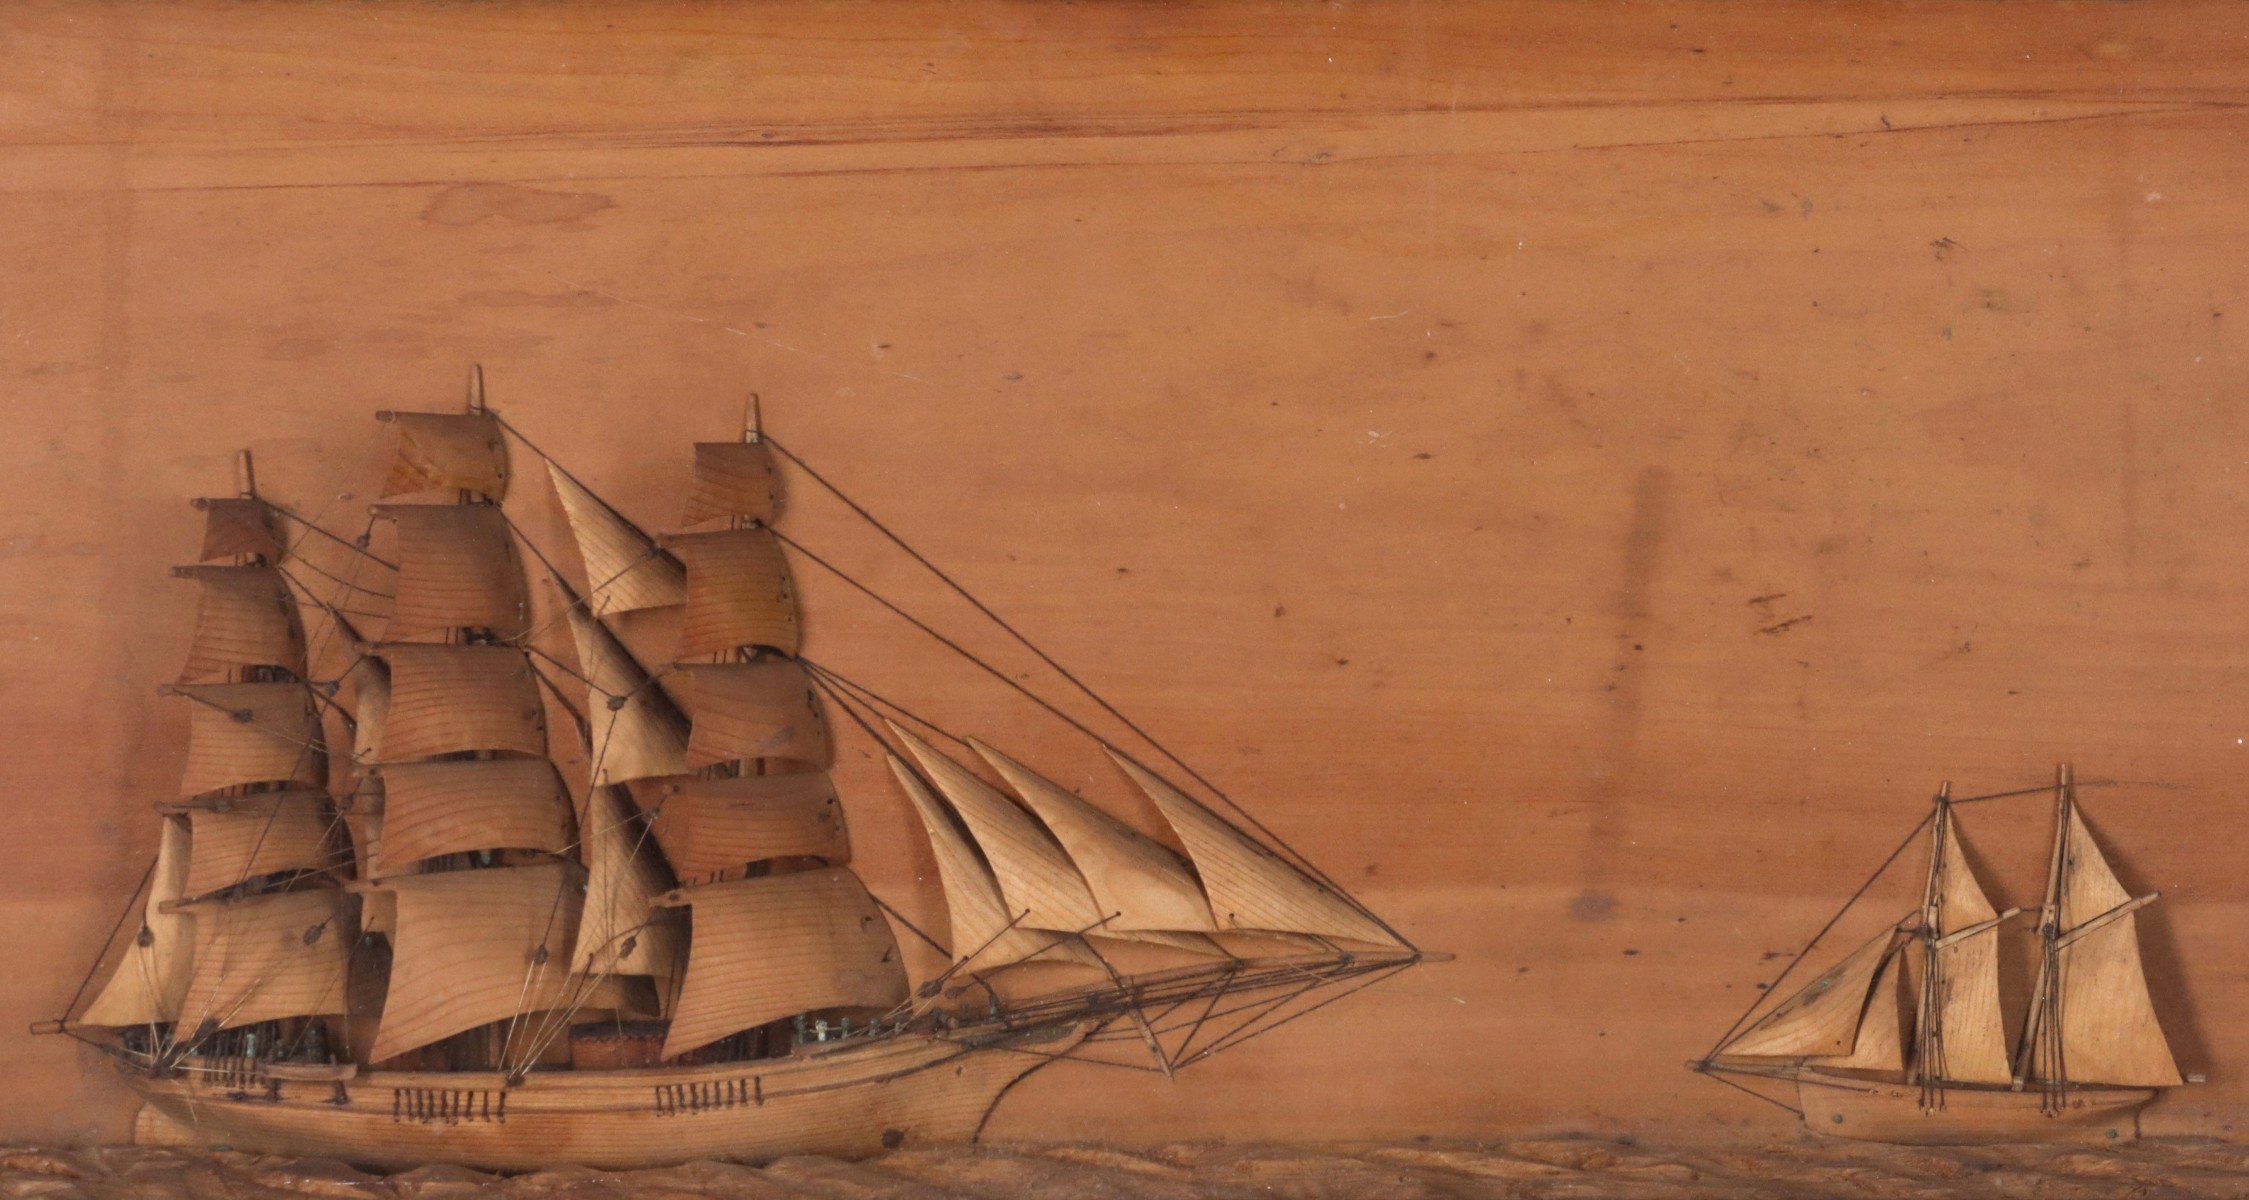 AN UNUSUAL CARVED WOOD FOLK ART DIORAMA WITH SHIPS